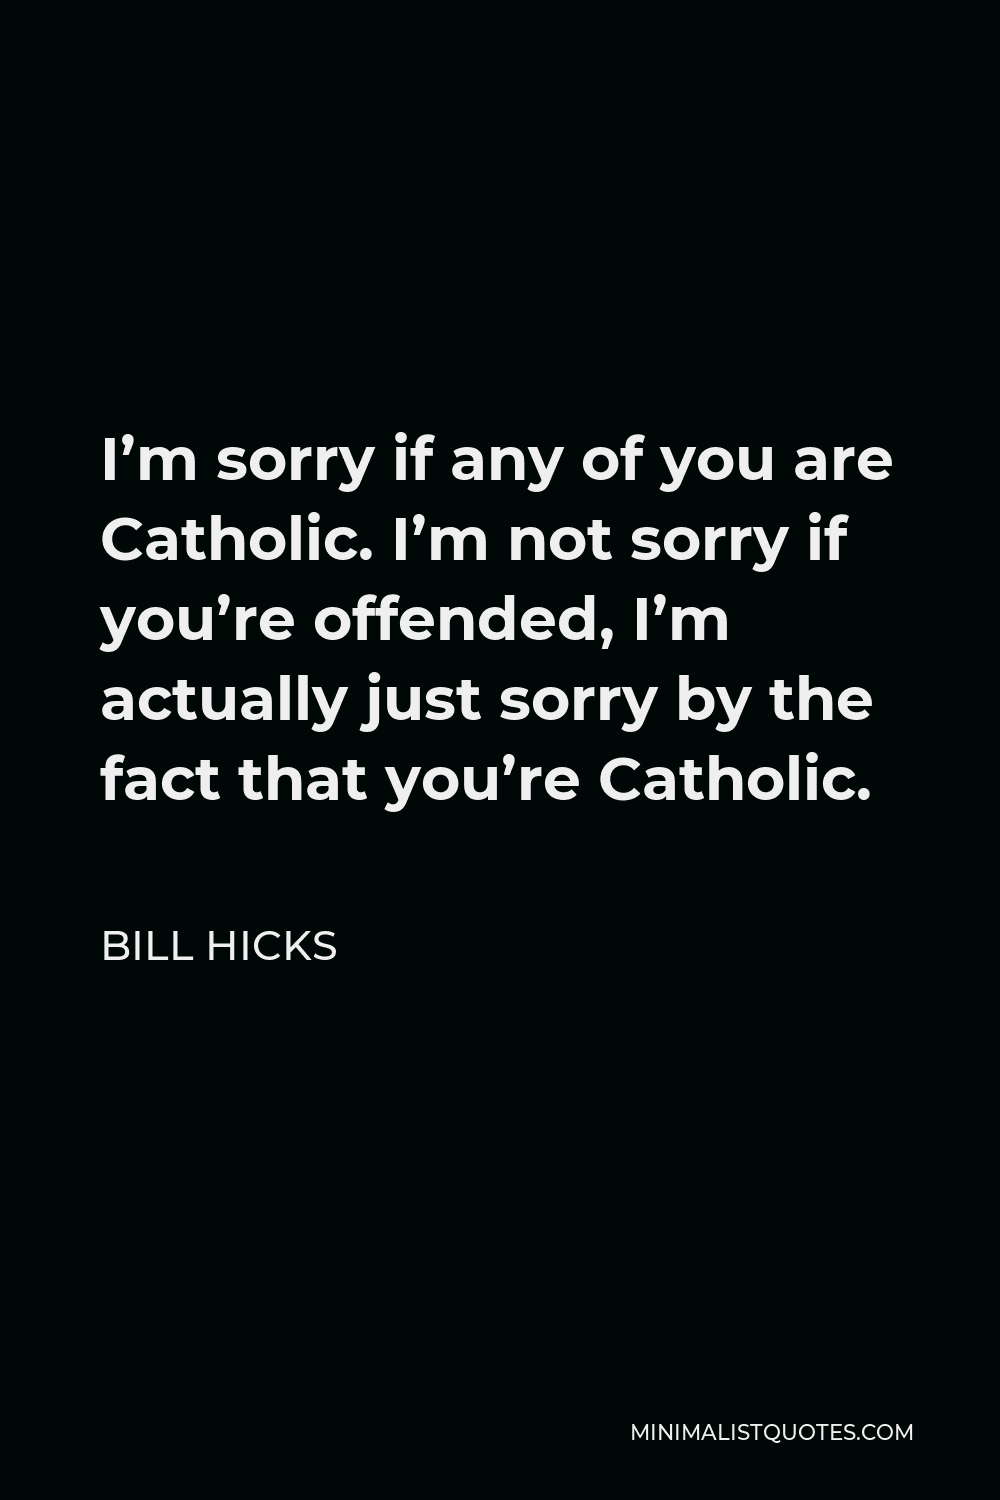 Bill Hicks Quote - I’m sorry if any of you are Catholic. I’m not sorry if you’re offended, I’m actually just sorry by the fact that you’re Catholic.